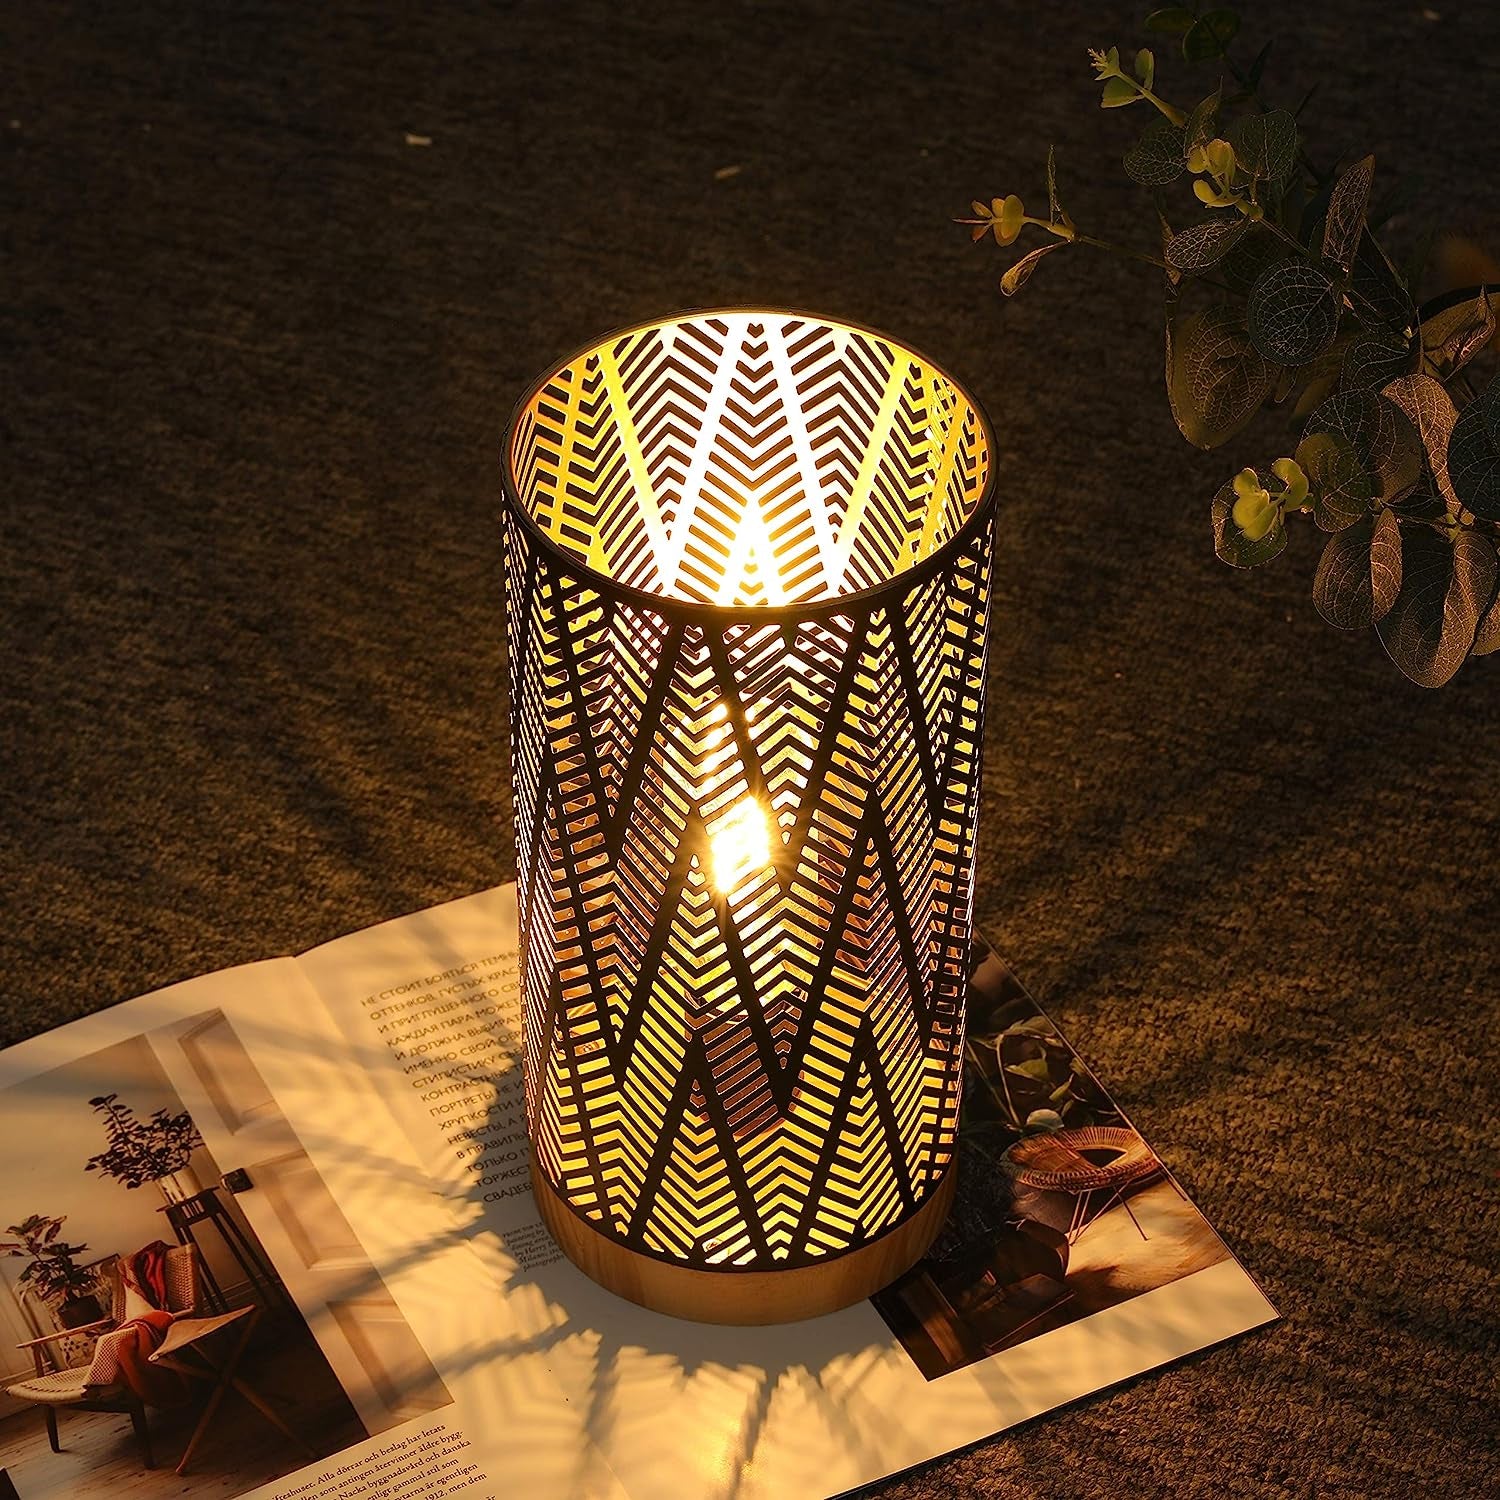 Metal Lamp Battery Powered 11''High Accent Cordless Lamp with LED Bulb Line Patterned Battery Lamp for Weddings Party Patio Garden Indoors Outdoors Table Balcony(With Wooden Base)